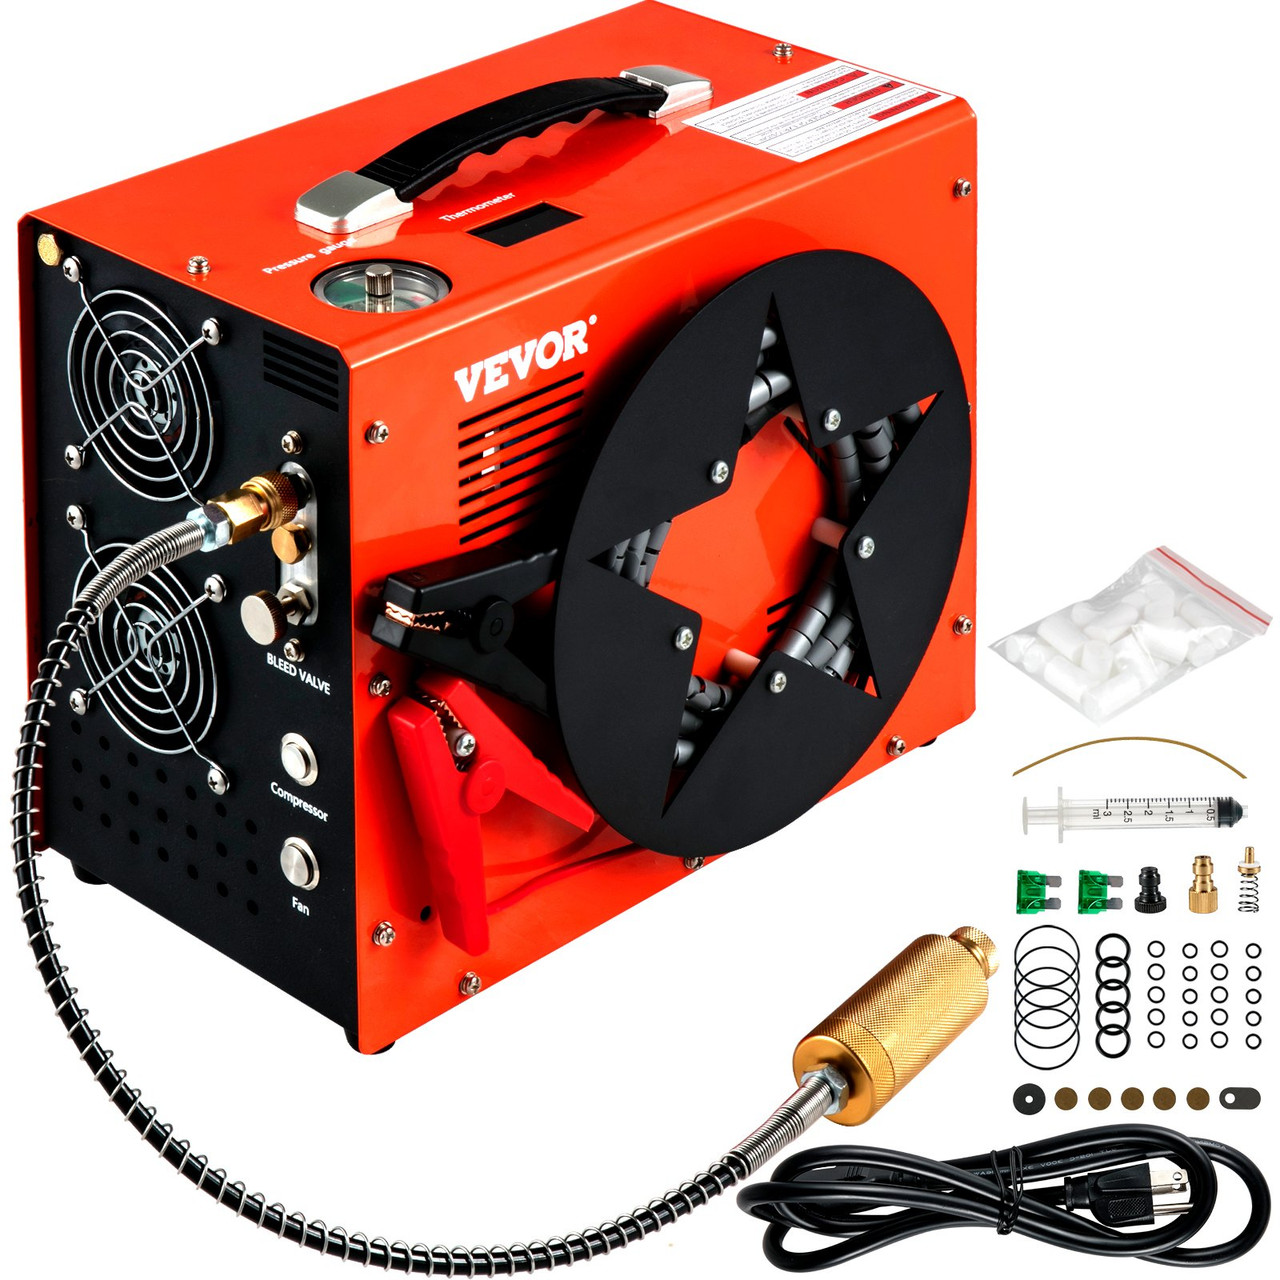 Electrical Bench Grinder Brake w/ Control Station, E-Stop & Start/Stop  Buttons - Stop Your Grinder Fast!